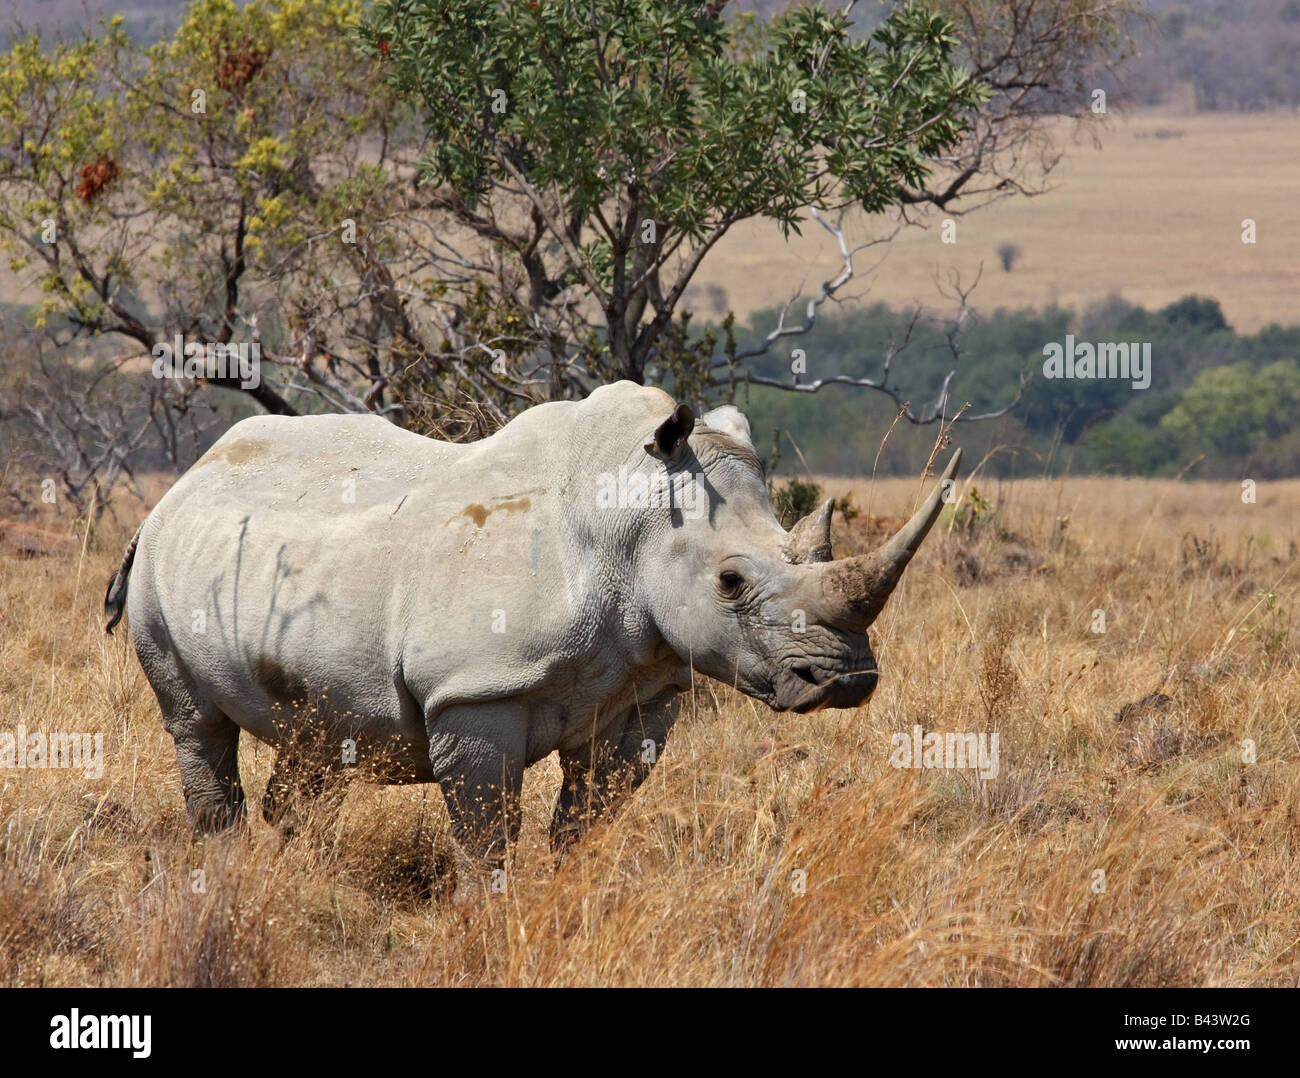 A picture of a white rhinoceros facing the camera Stock Photo